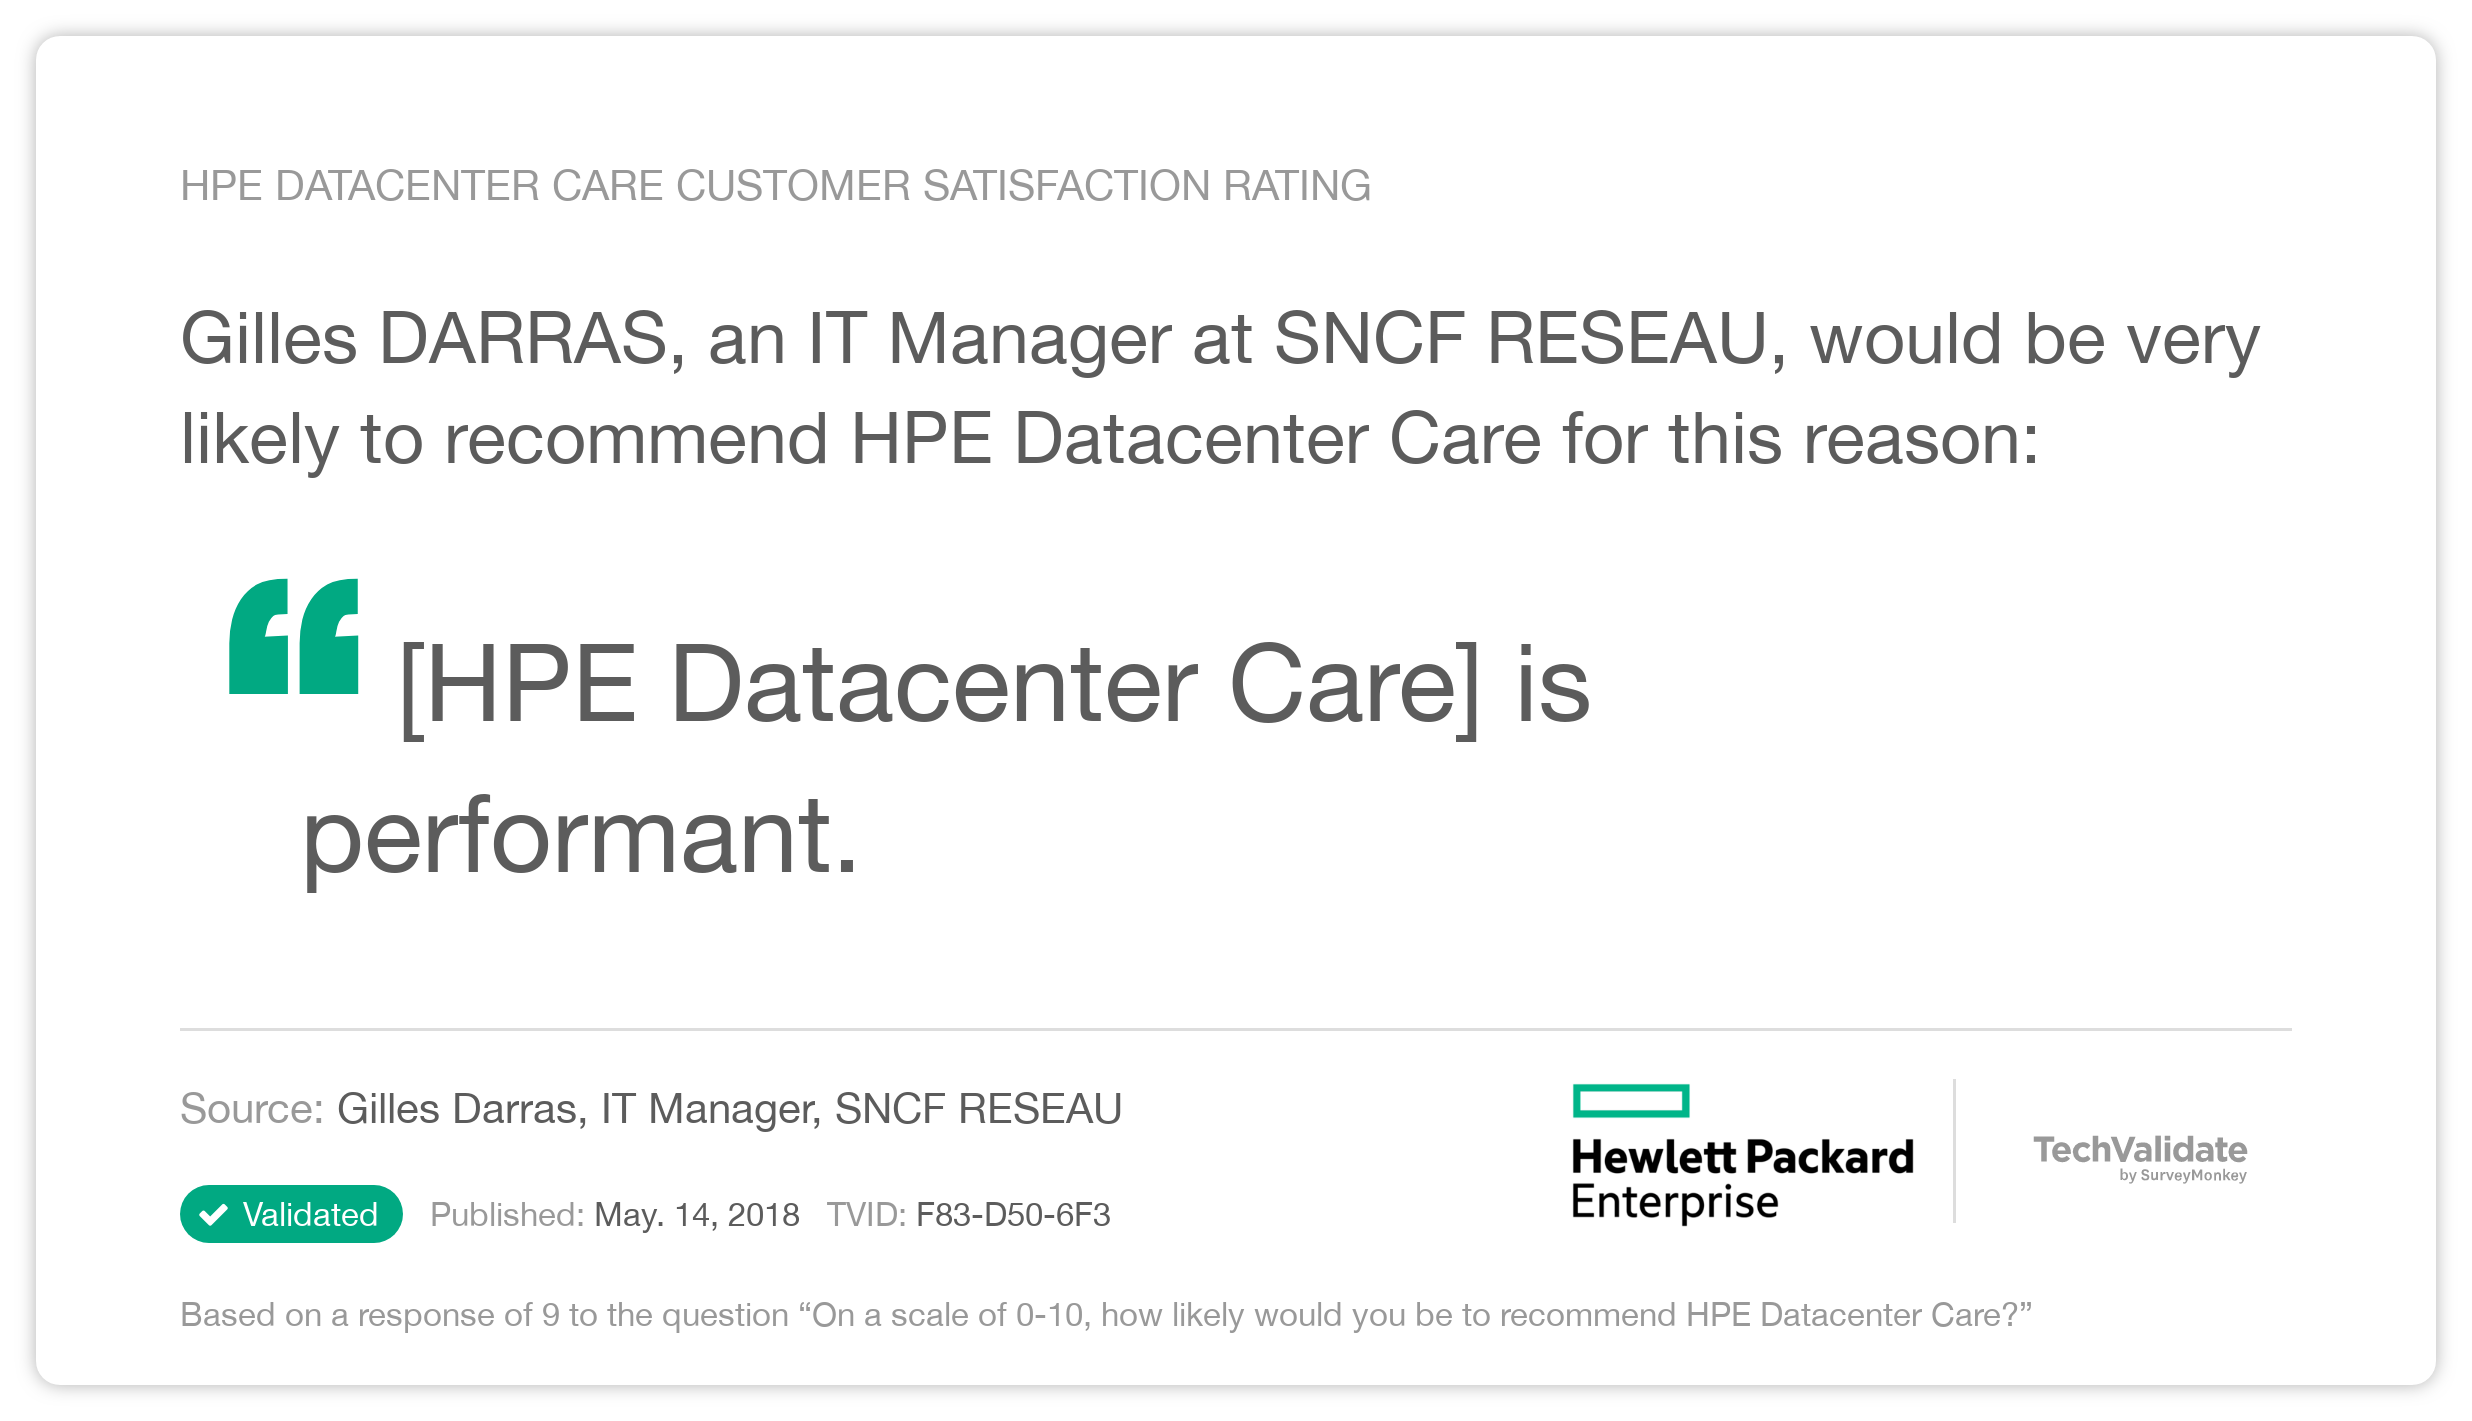 HPE Datacenter Care Customer Satisfaction Rating